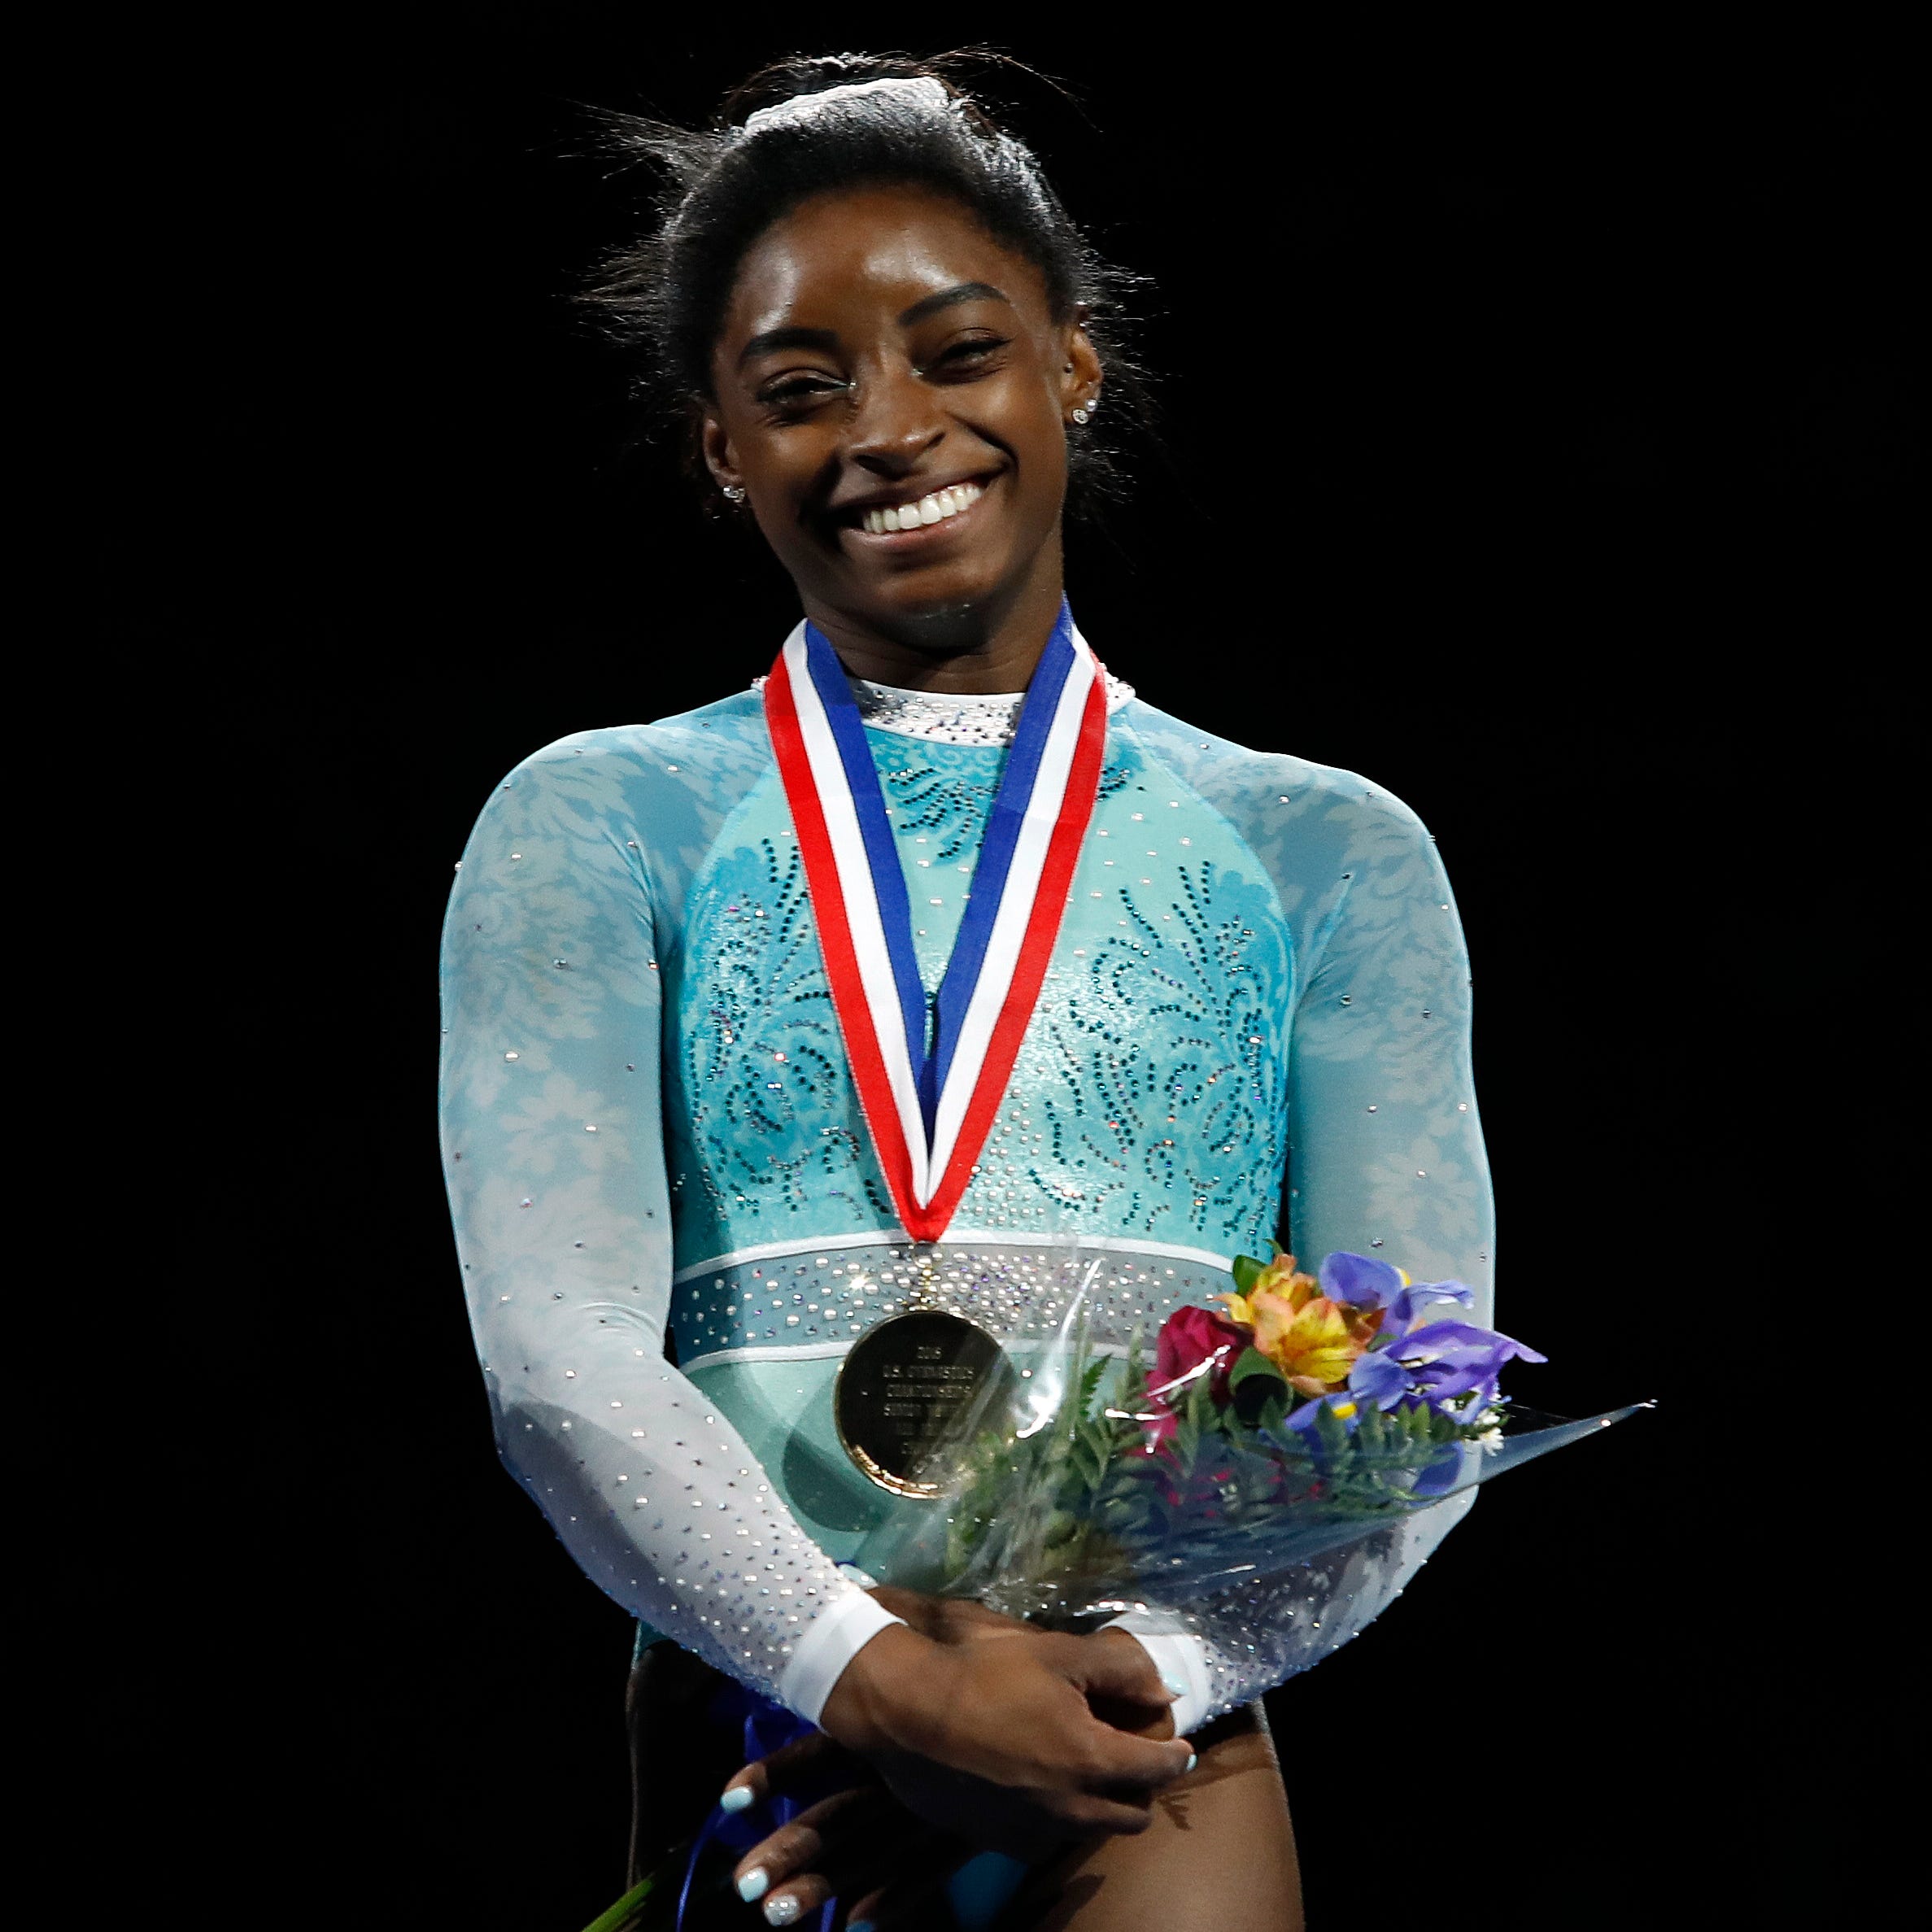 Simone Biles smiles after winning the women's all-around during the U.S. Gymnastics Championships.